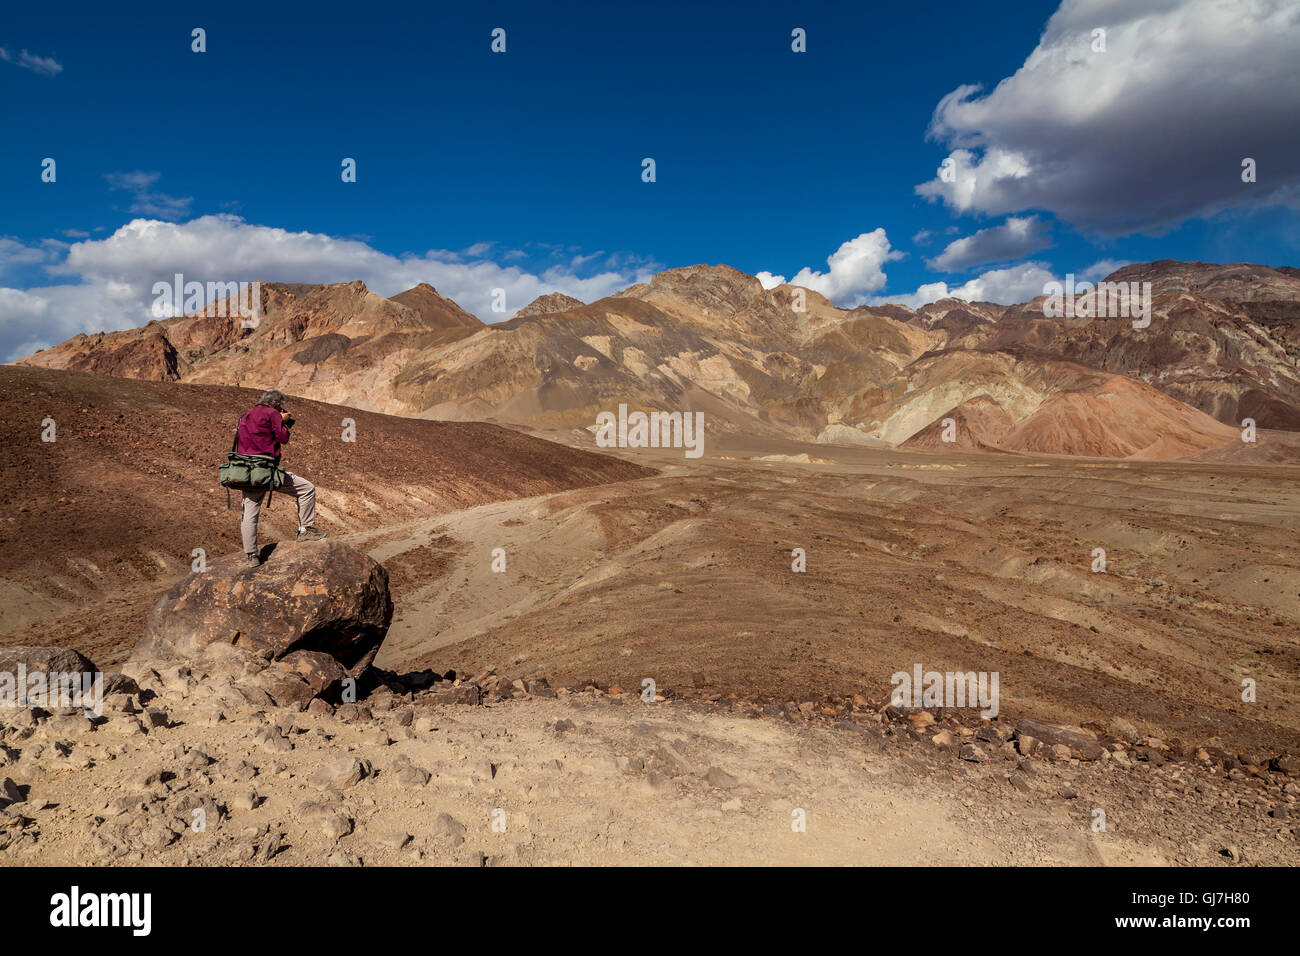 Man taking pictures of the volcanic sedimentary hills near Artist's Palette, Death Valley National Park, California, USA Stock Photo